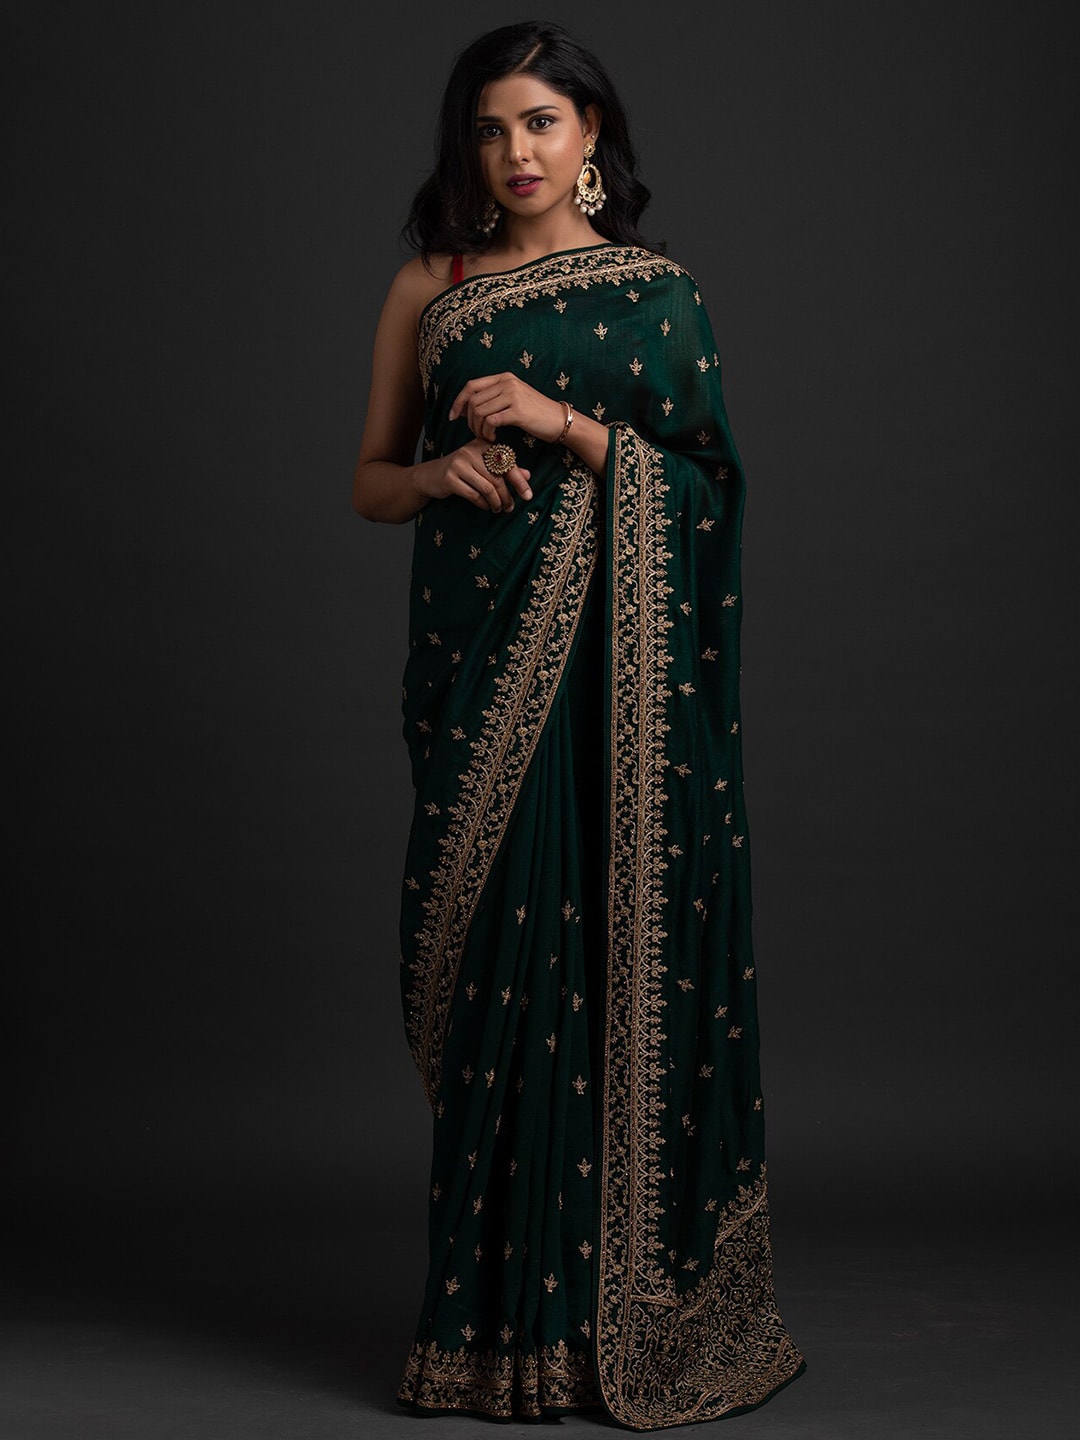 Koskii Green & Gold-Toned Floral Embroidered Art Silk Saree Price in India